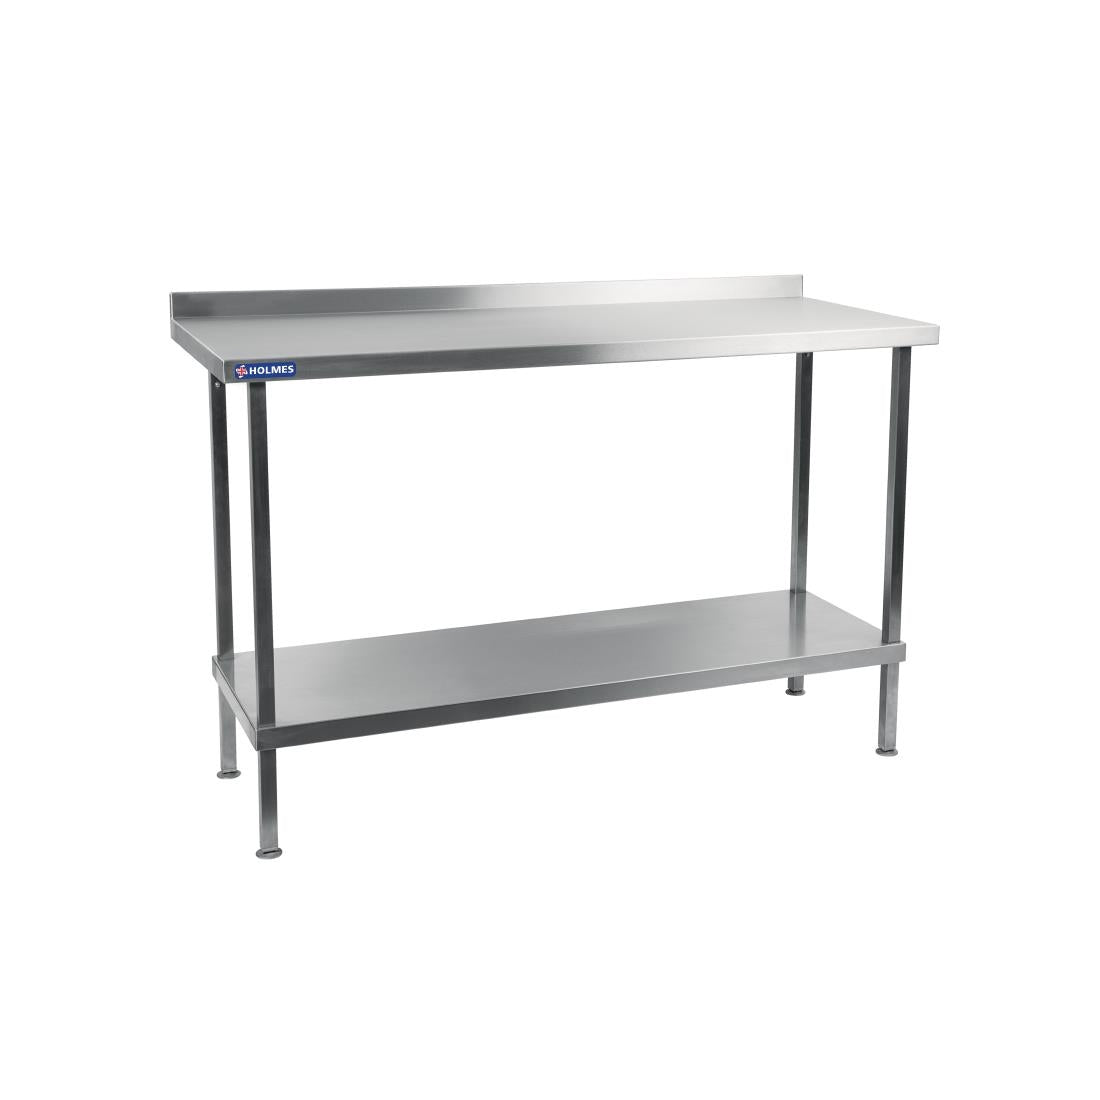 DR027 Holmes Stainless Steel Wall Table with Upstand 600mm JD Catering Equipment Solutions Ltd